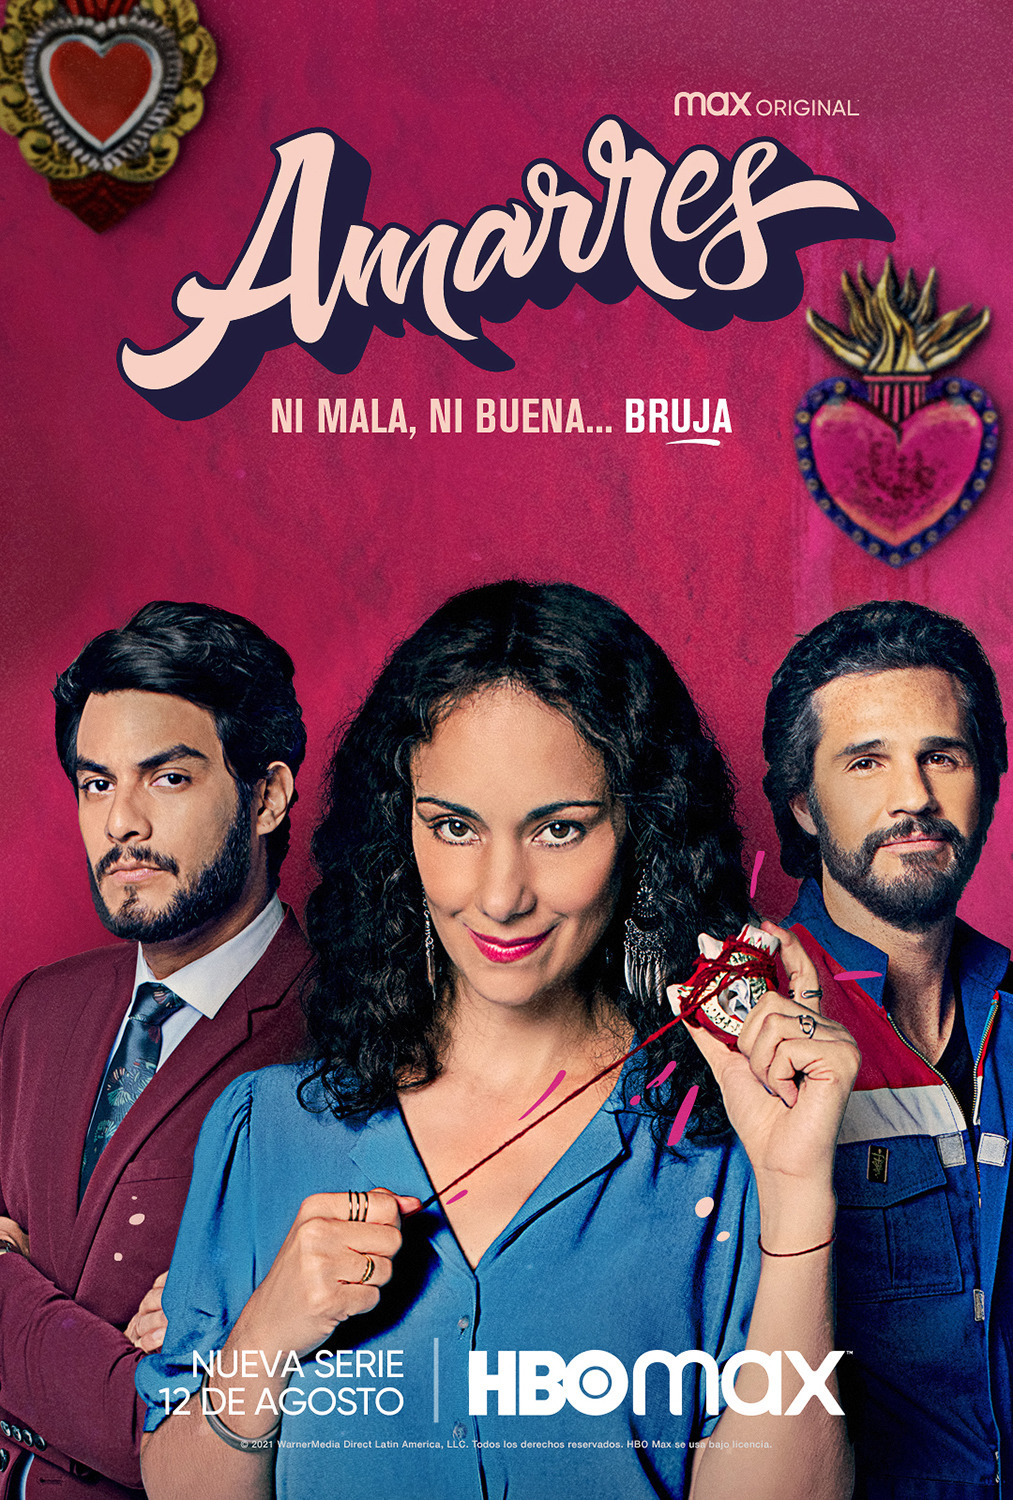 Extra Large TV Poster Image for Amarres 